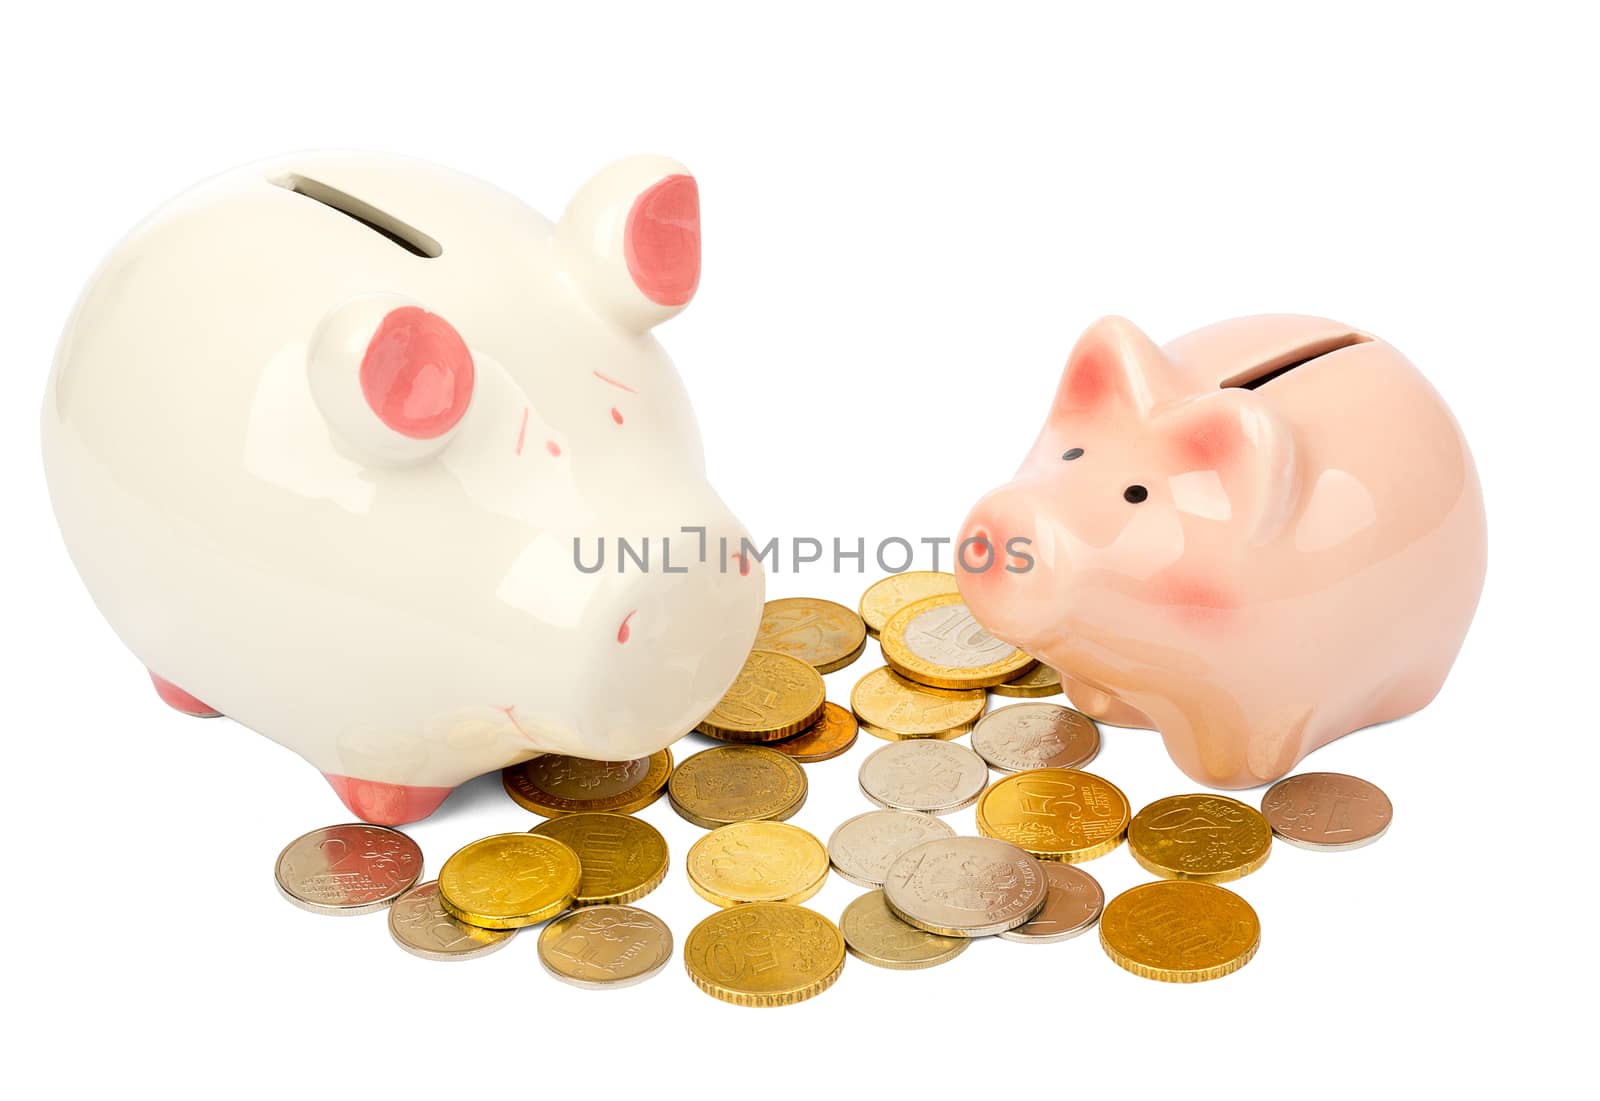 Piggy banks with coins on isolated white background